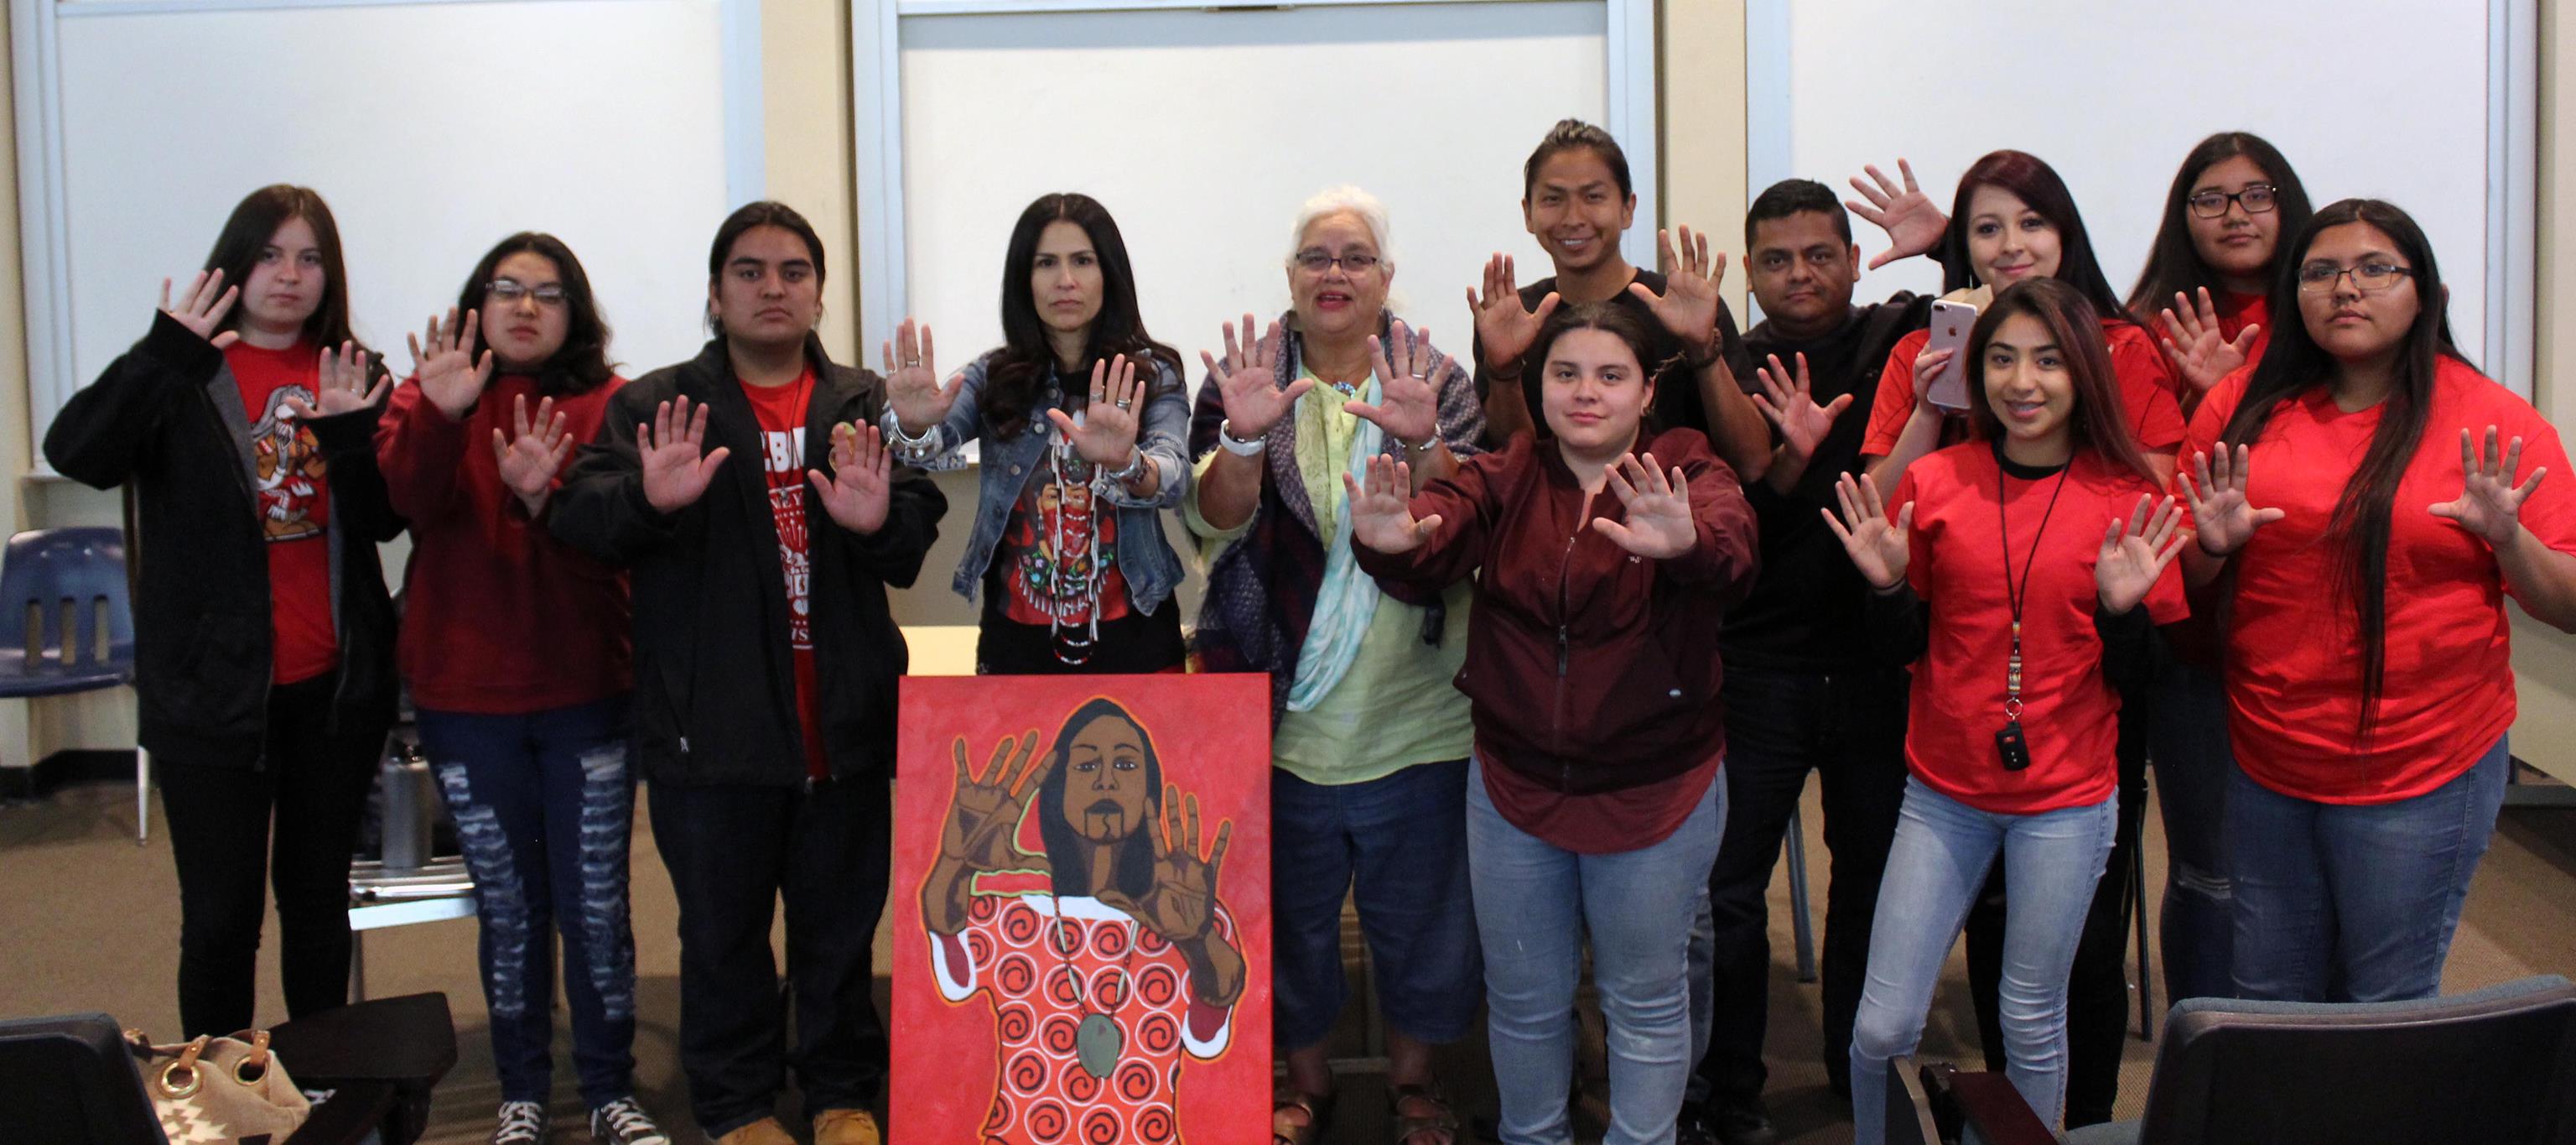 People standing together behind a painting of a Native woman wearing red and holding both of her hands out, palms forward. The people who are standing have serious expressions and are also holding their hands out, palms forward, just like the woman in the painting.